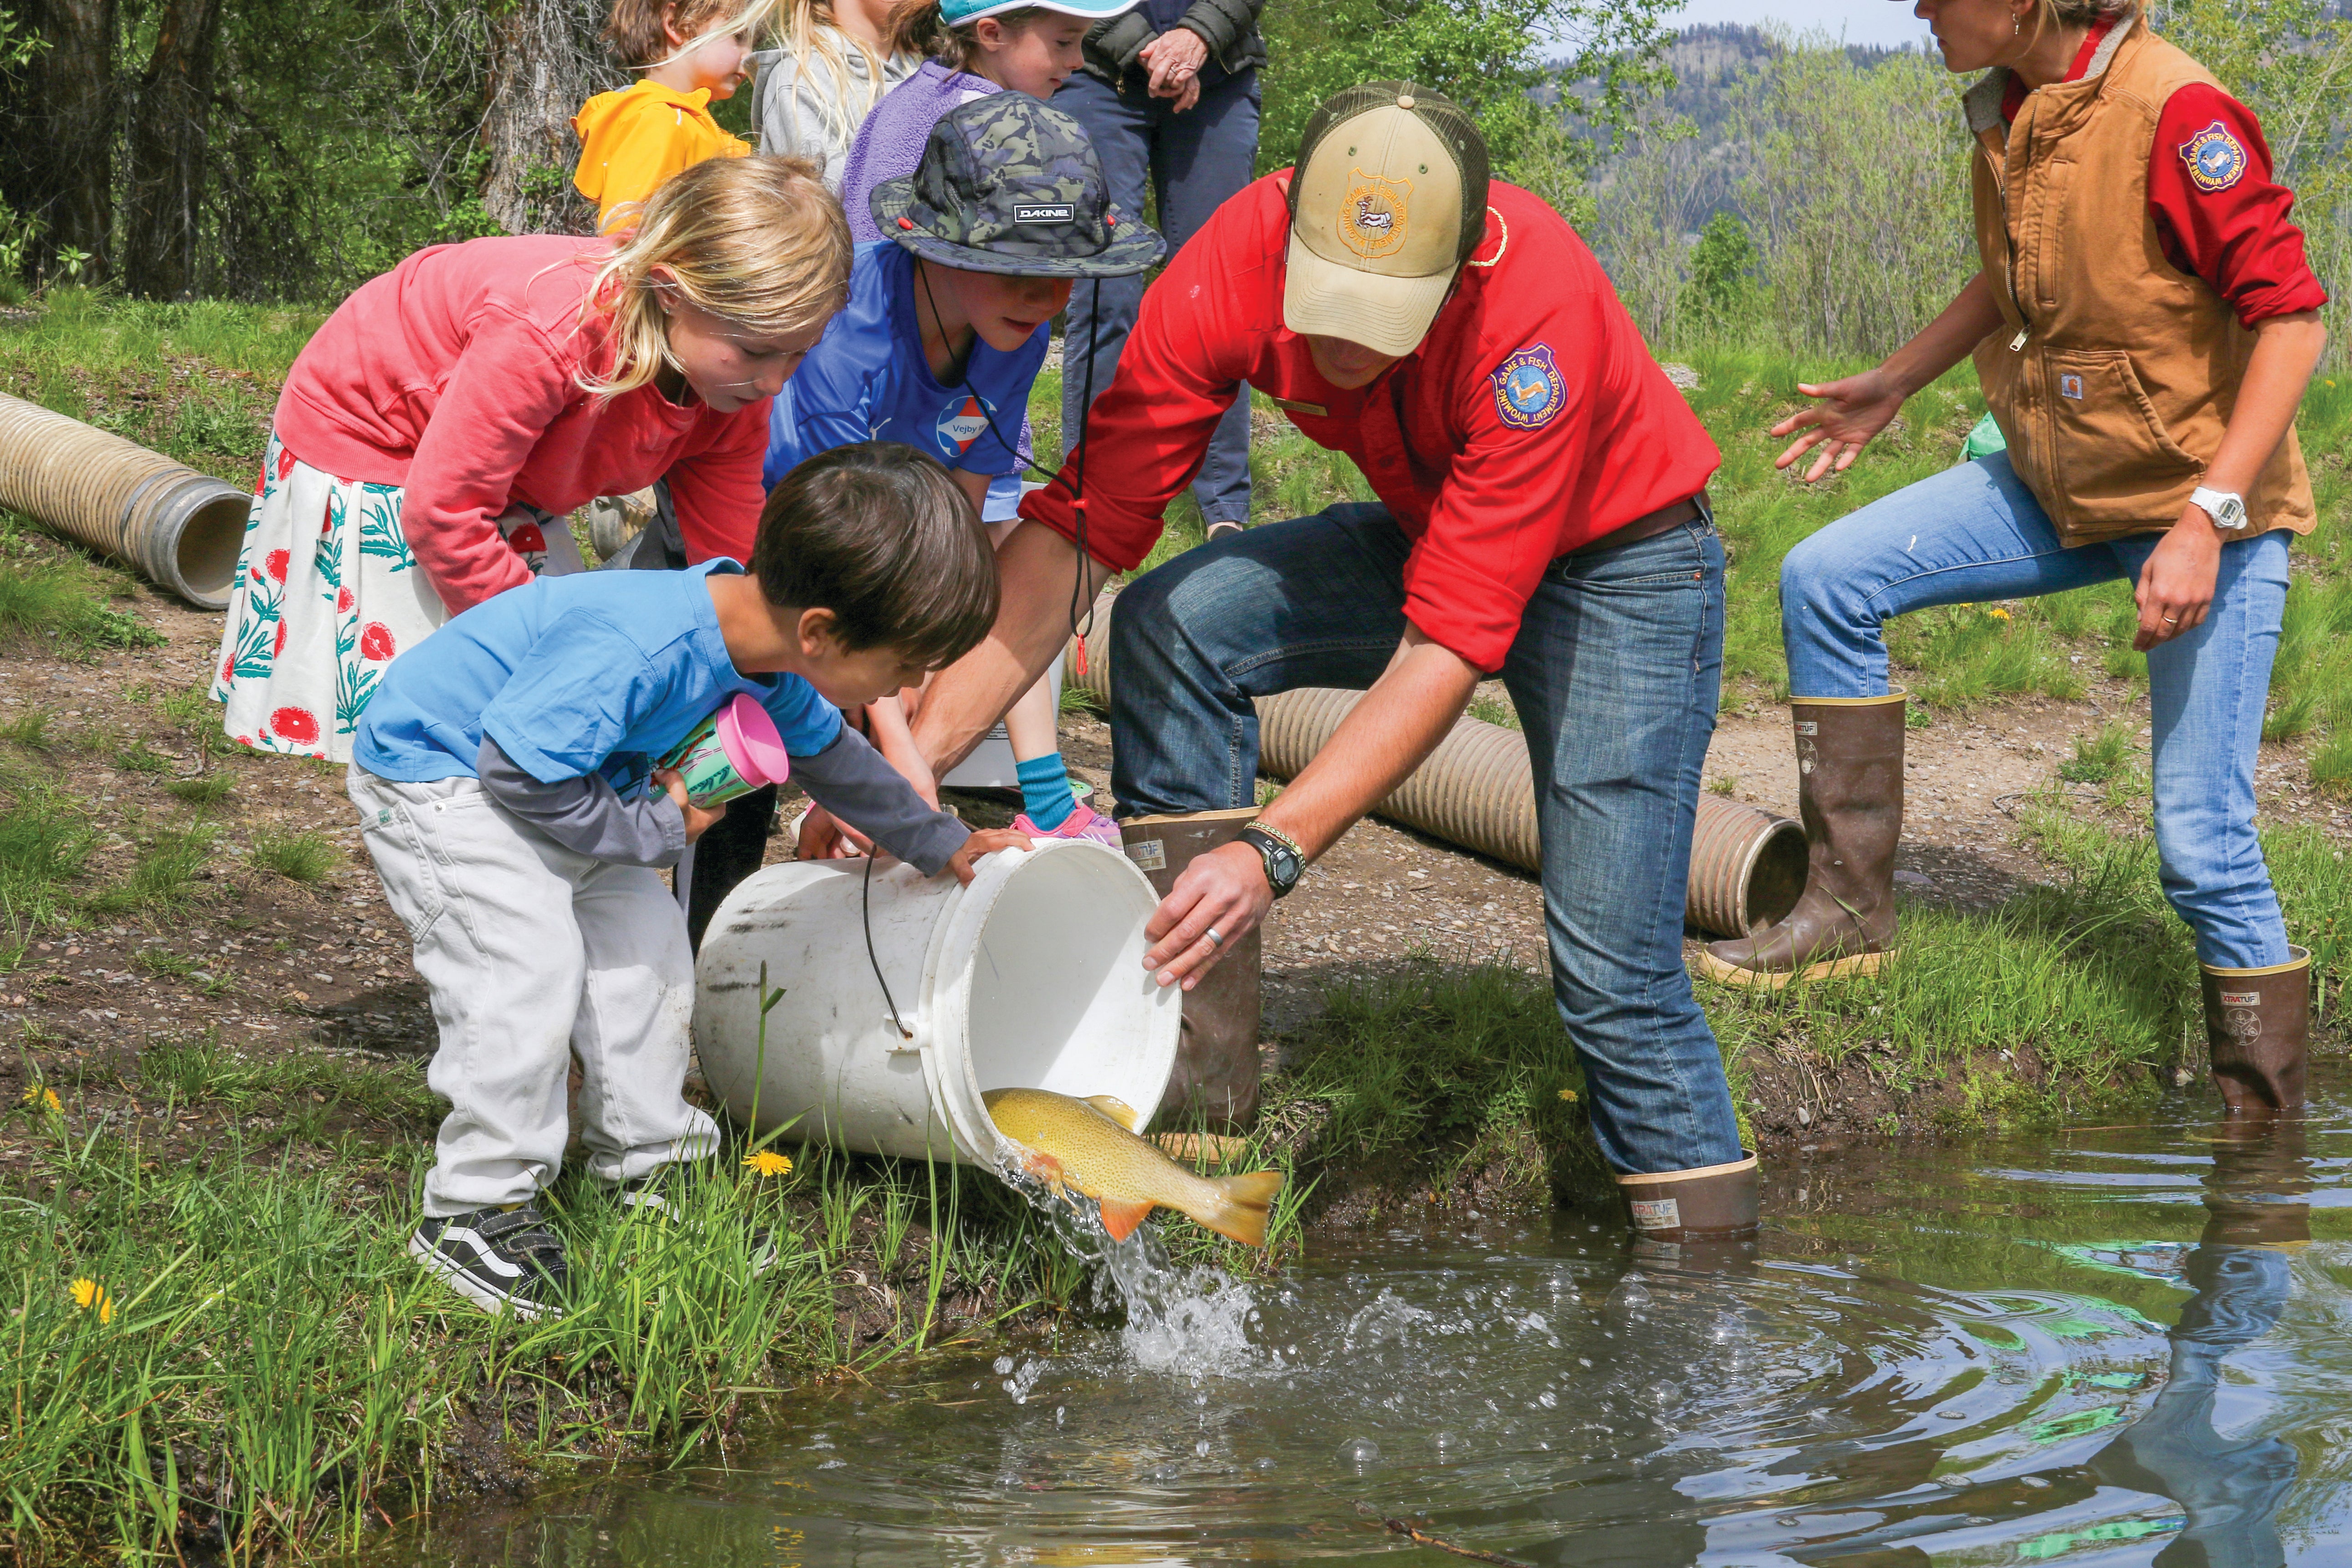 A Wyoming Game and Fish Employee assists 3 kids as they dump cutthroat trout out of a bucket to help stock R Park pond.